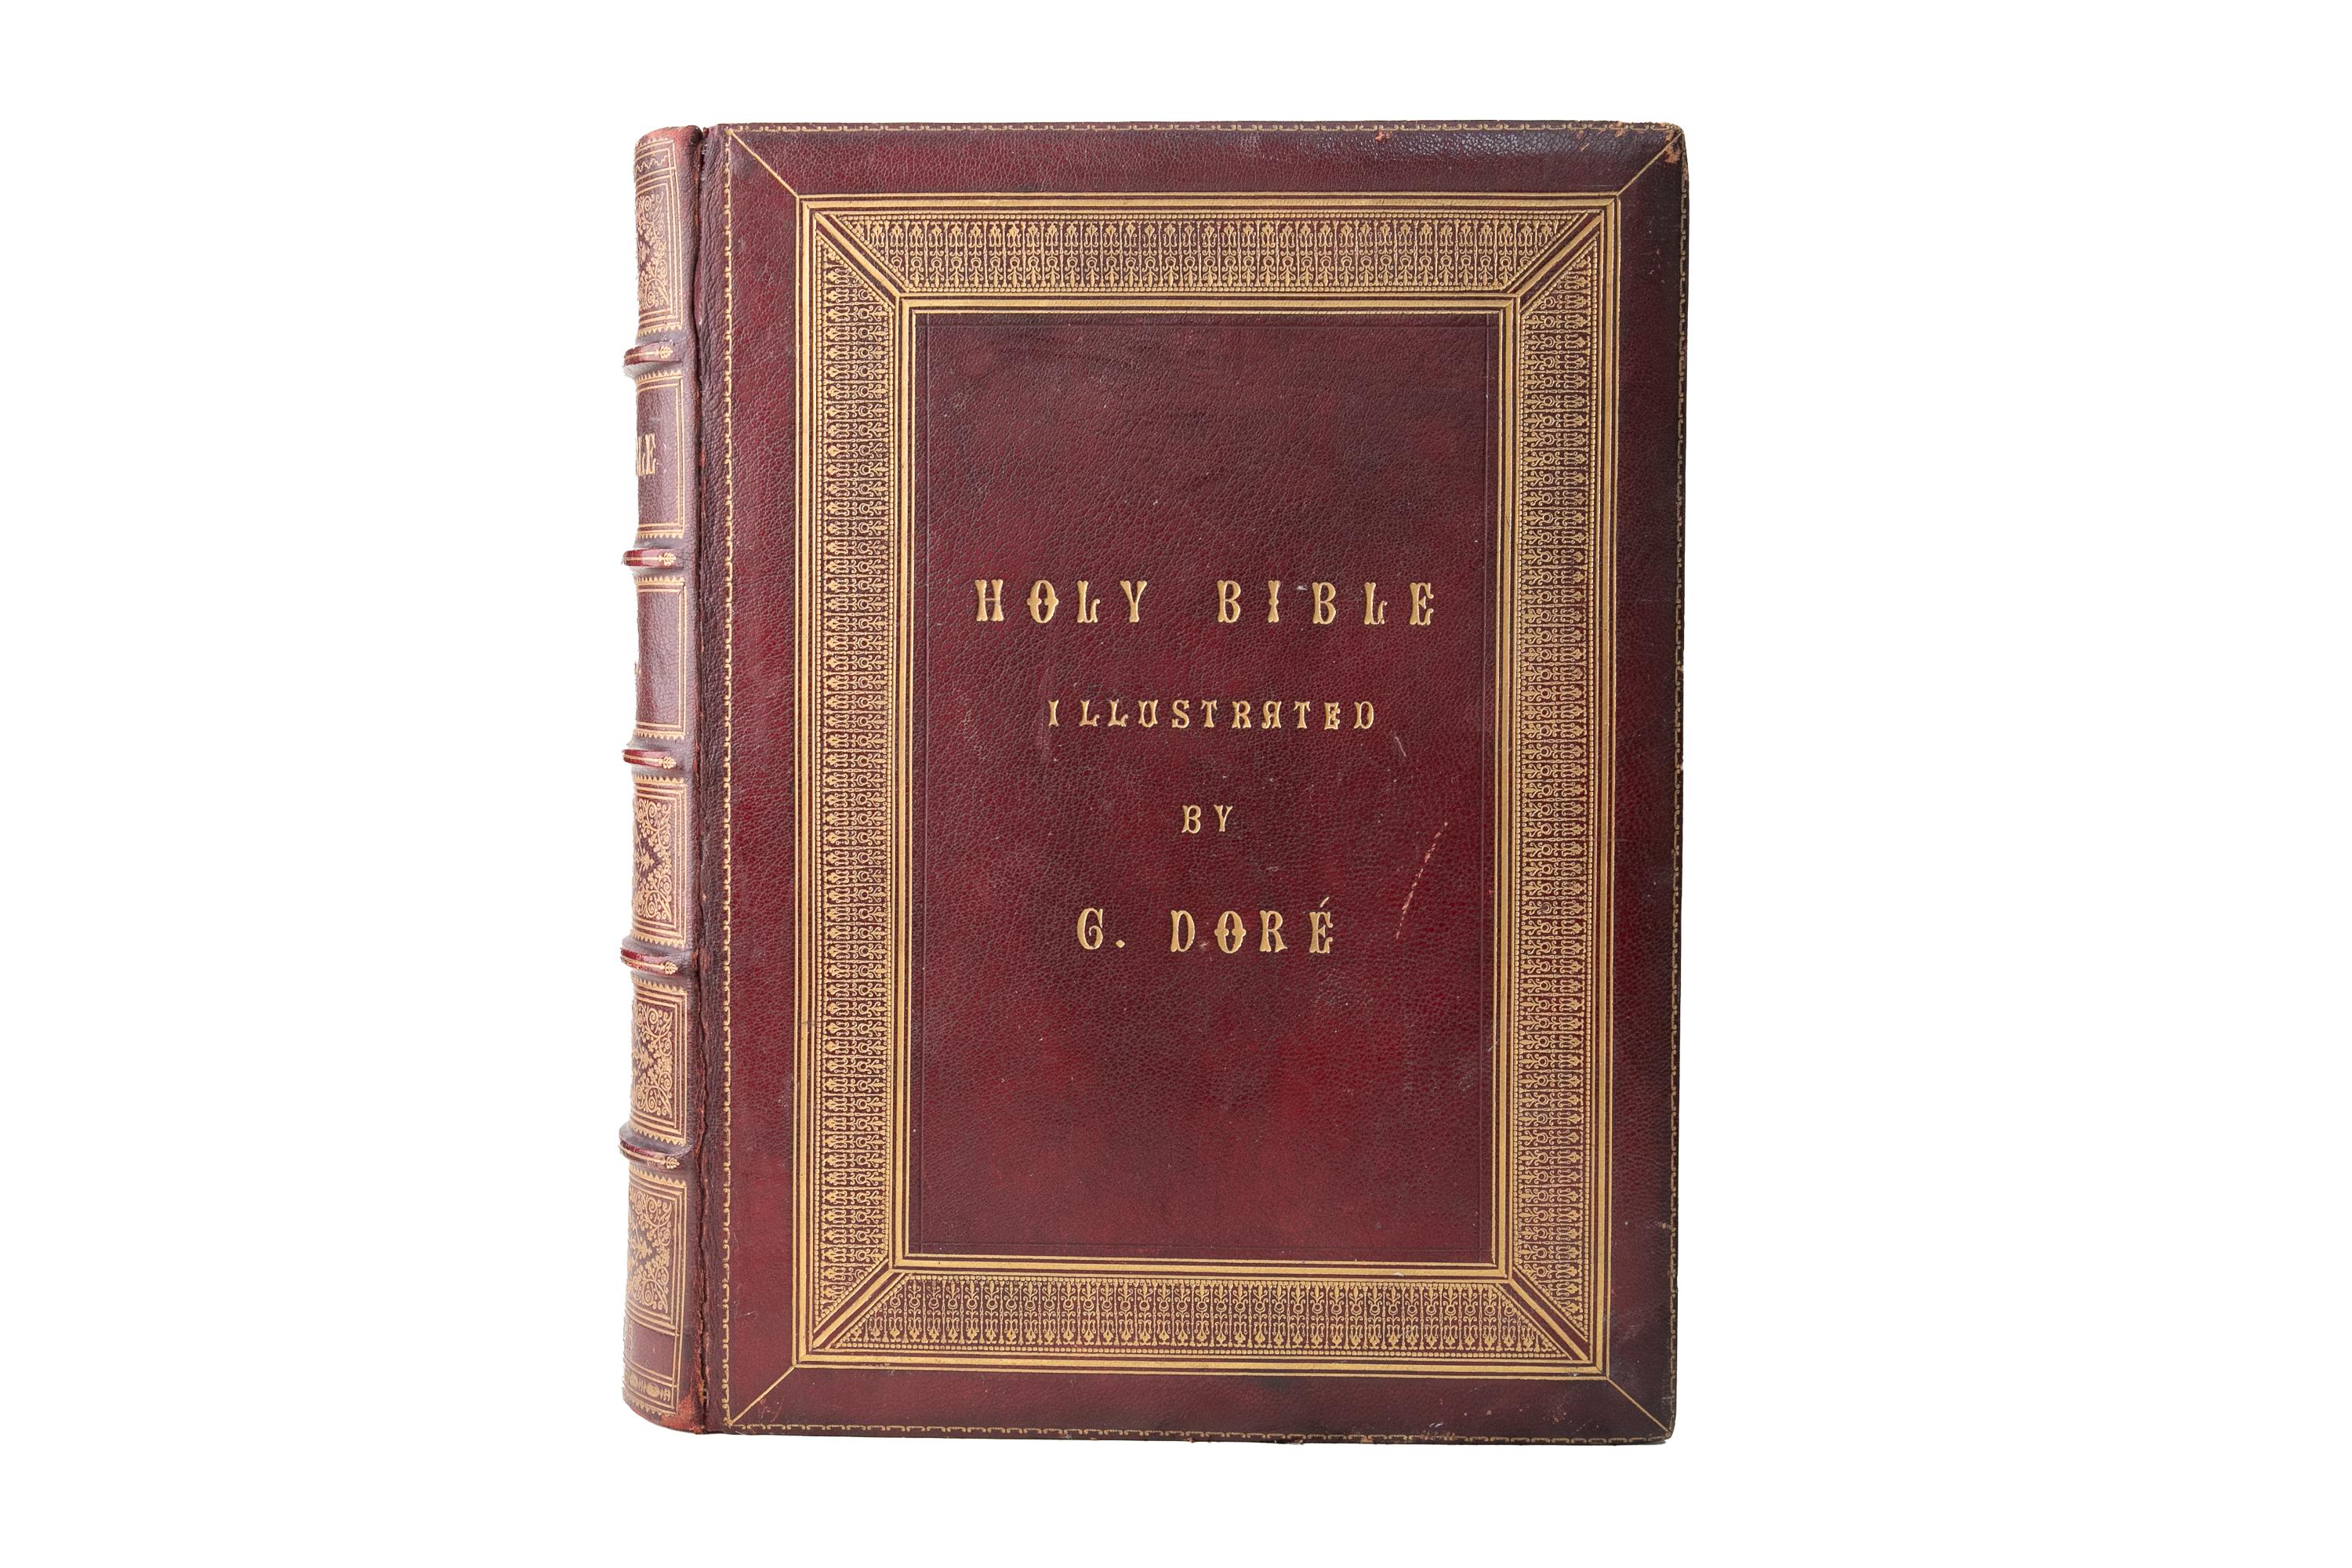 2 Vols. (Anon) The Holy Bible. Illustrated by Gustave Dore. Bound in full red morocco, all edges gilt, raised bands, ornate gilt on spines and covers, marbled endpapers. Covers neatly rehinged. Thick Folios. Published: London: Cassell, Petter &